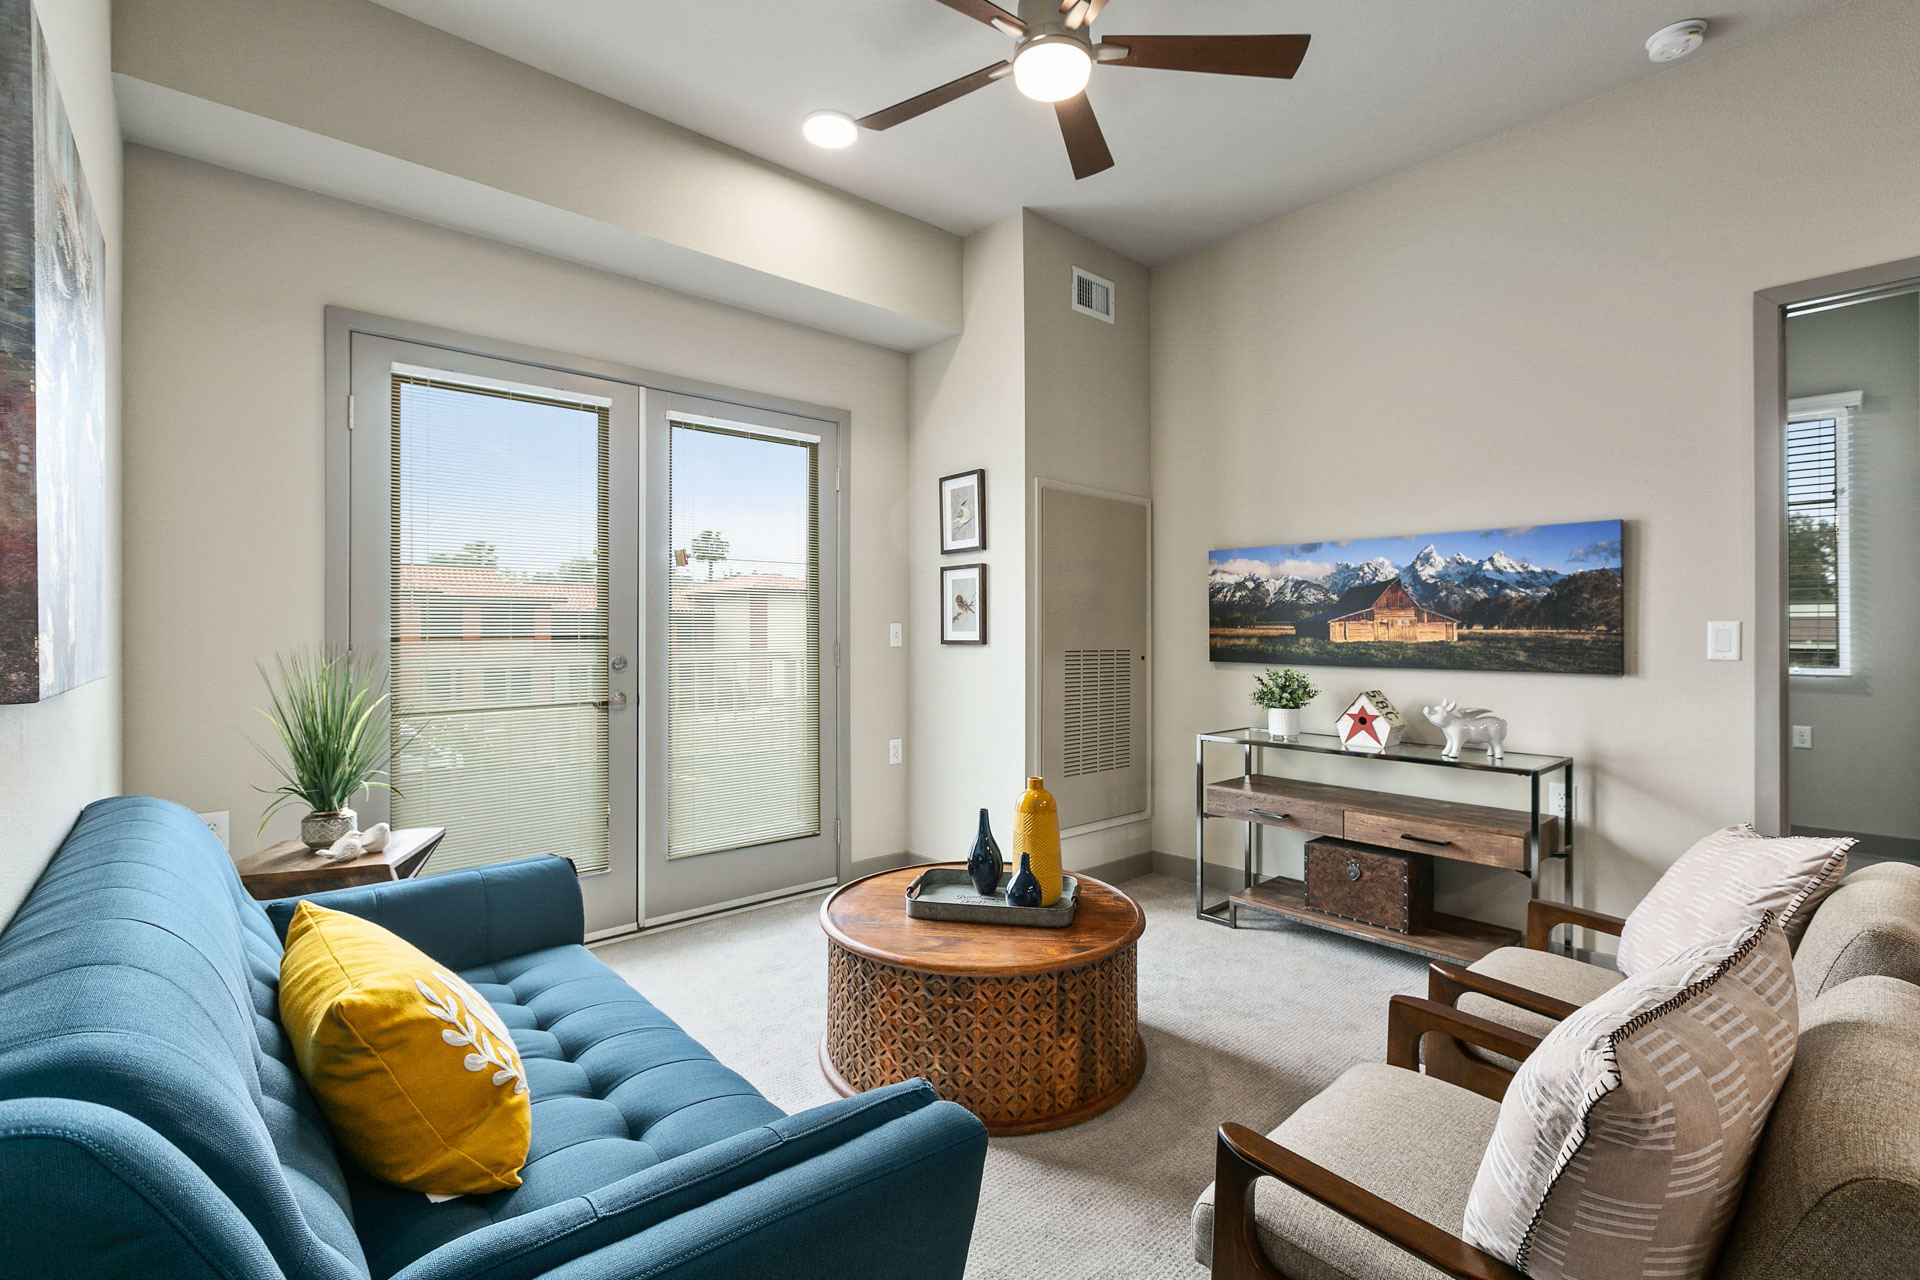 Choose from studio, or one- or two-bedroom apartments floorplans. Decks or patios are available in some apartments and all include utilities. Cable, concierge service, housekeeping and laundry are available. Scheduled bus and van transportation available. And were pet friendly!